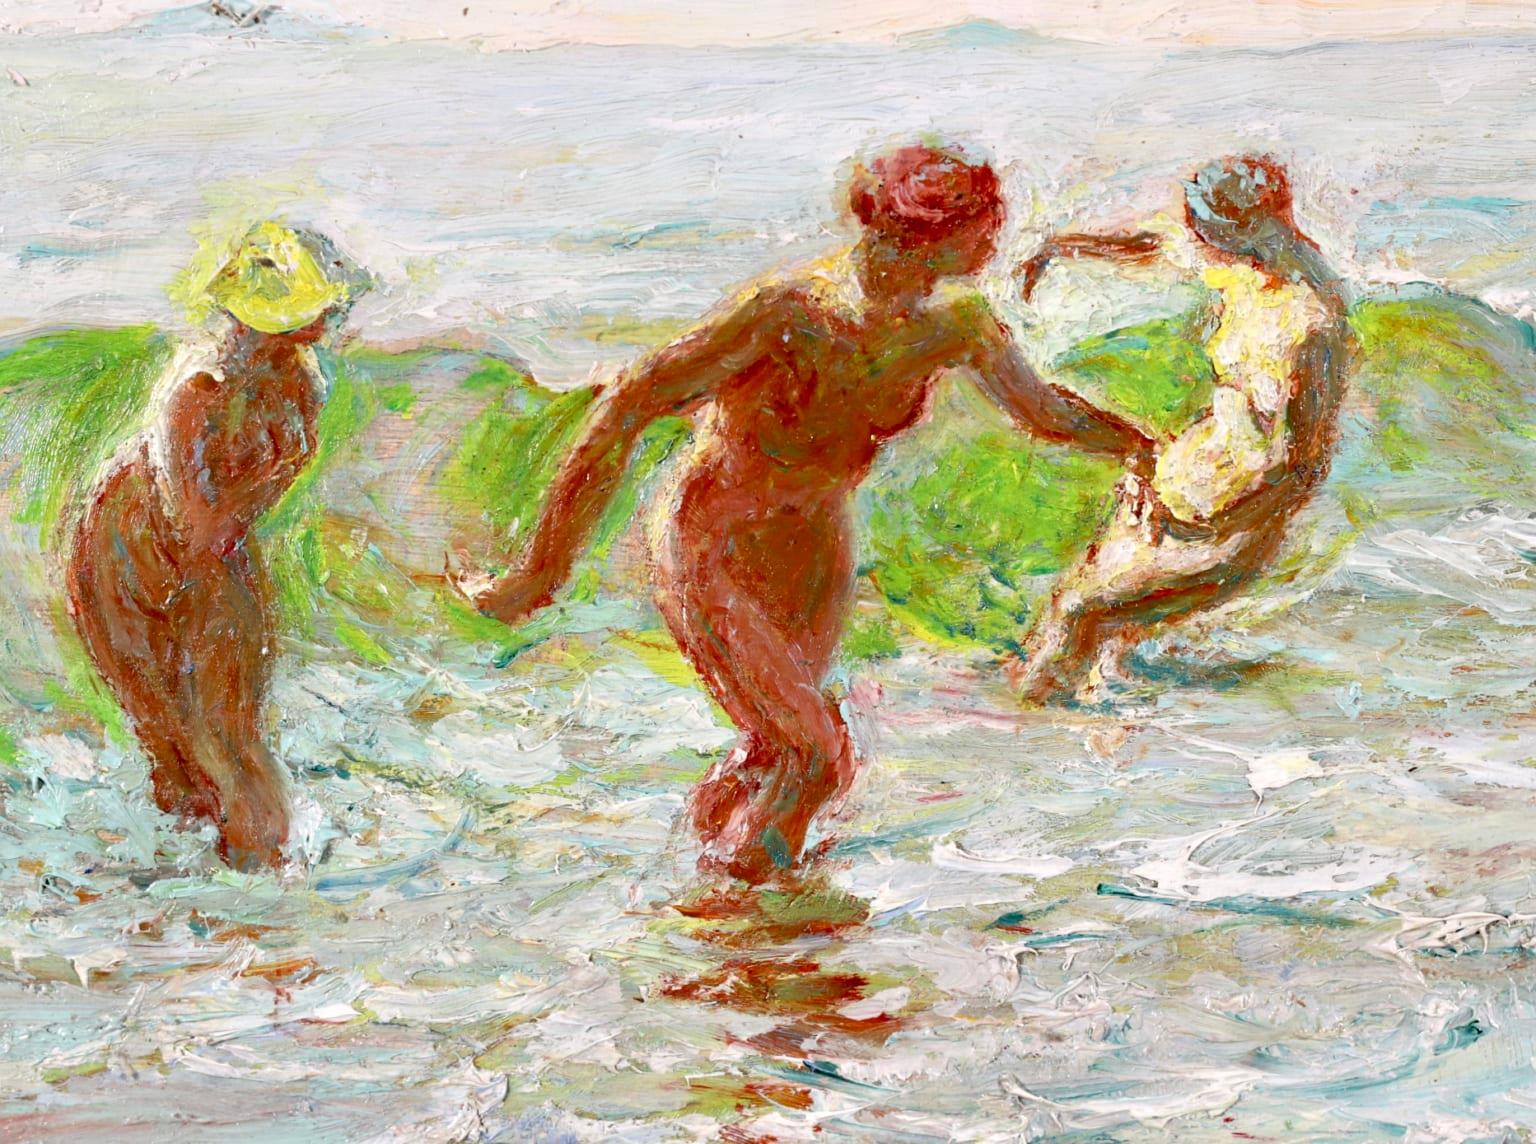 Bathers - Post Impressionist Oil, Nude Figures in Seascape by Octave Guillonnet 2